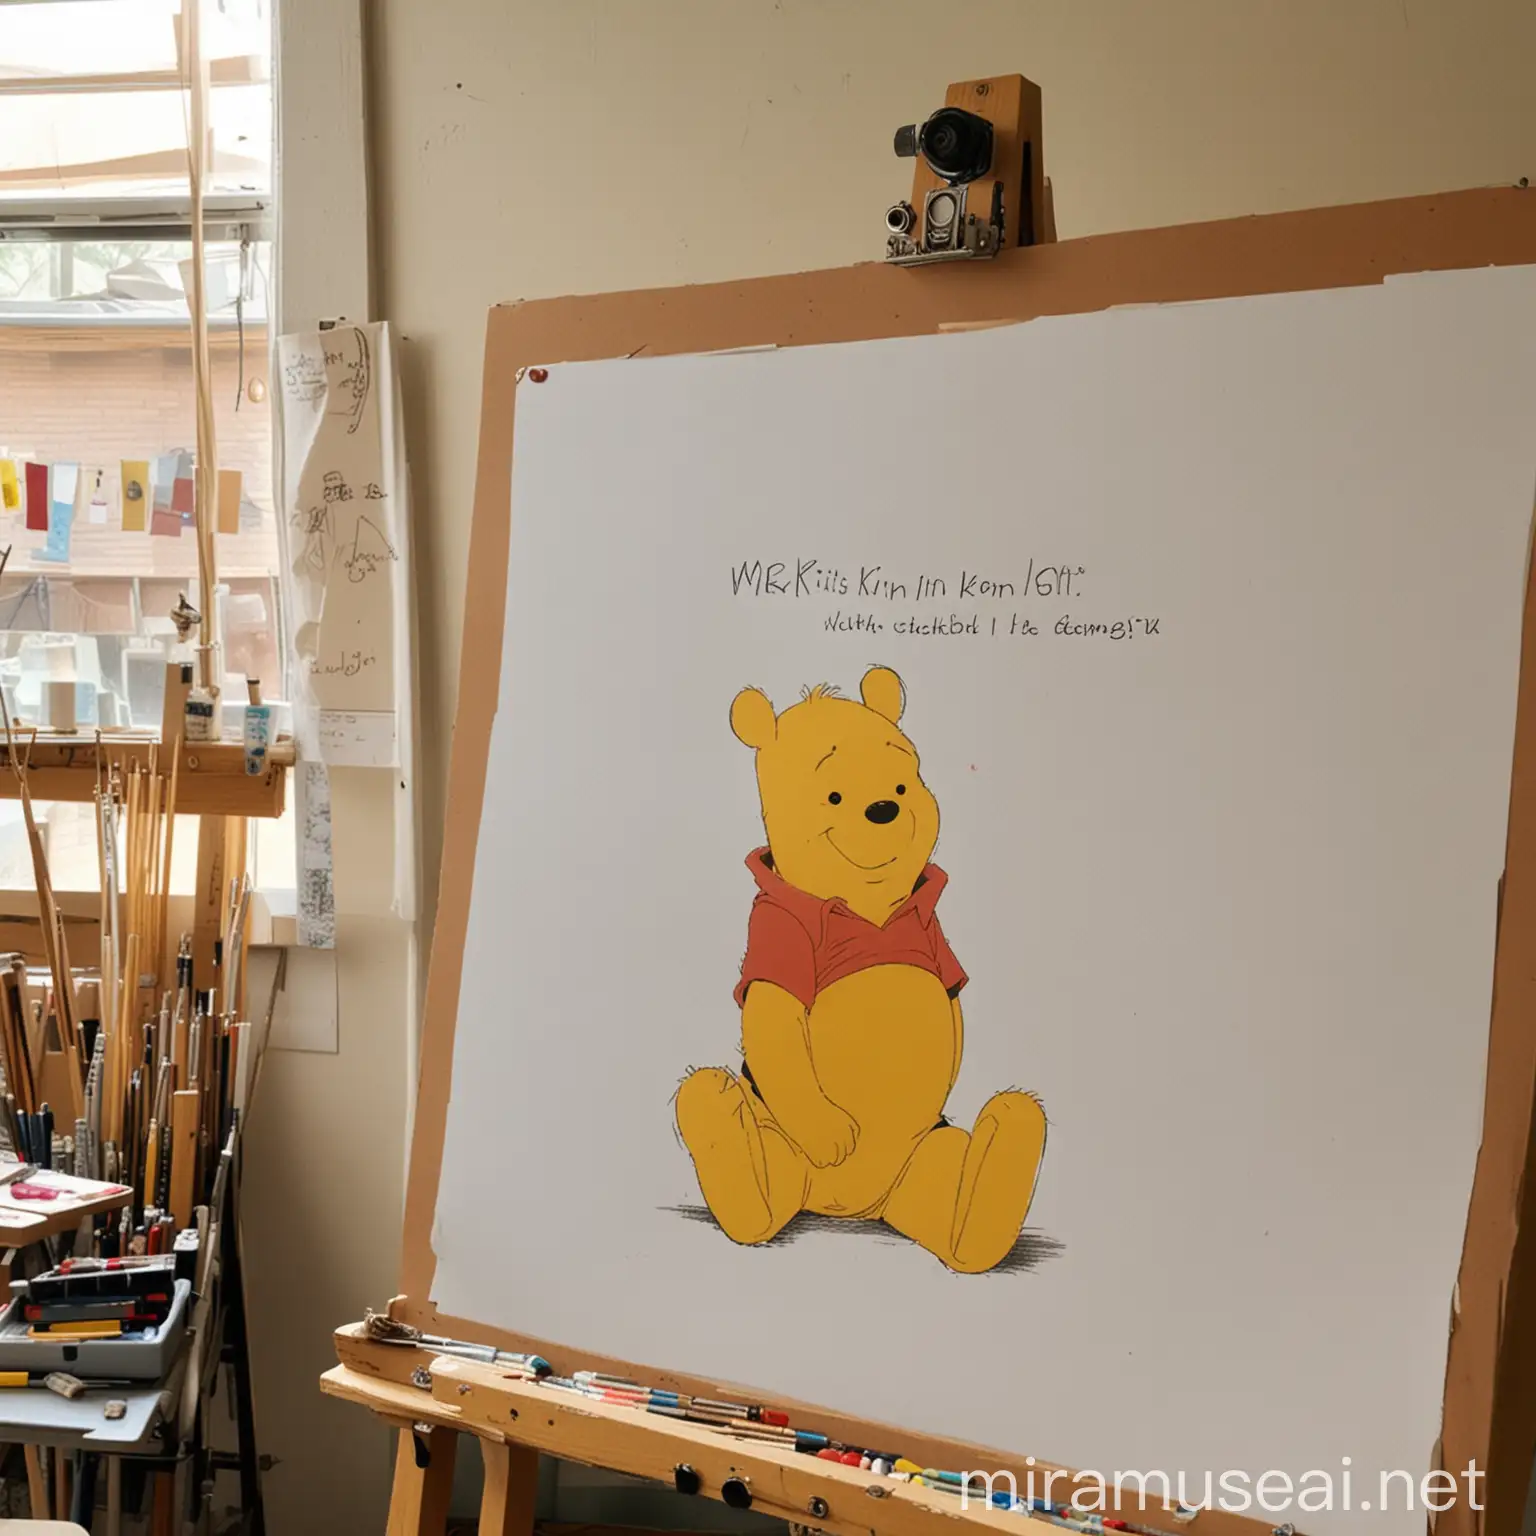 The background is an art studio.
There are art tools around.
Disney's animation "Winnie Pooh" is depicted on the drawing paper hung on the panel.
At the bottom right, the words "Mr. Kim 2024.05" are written large.
achromatic colors.